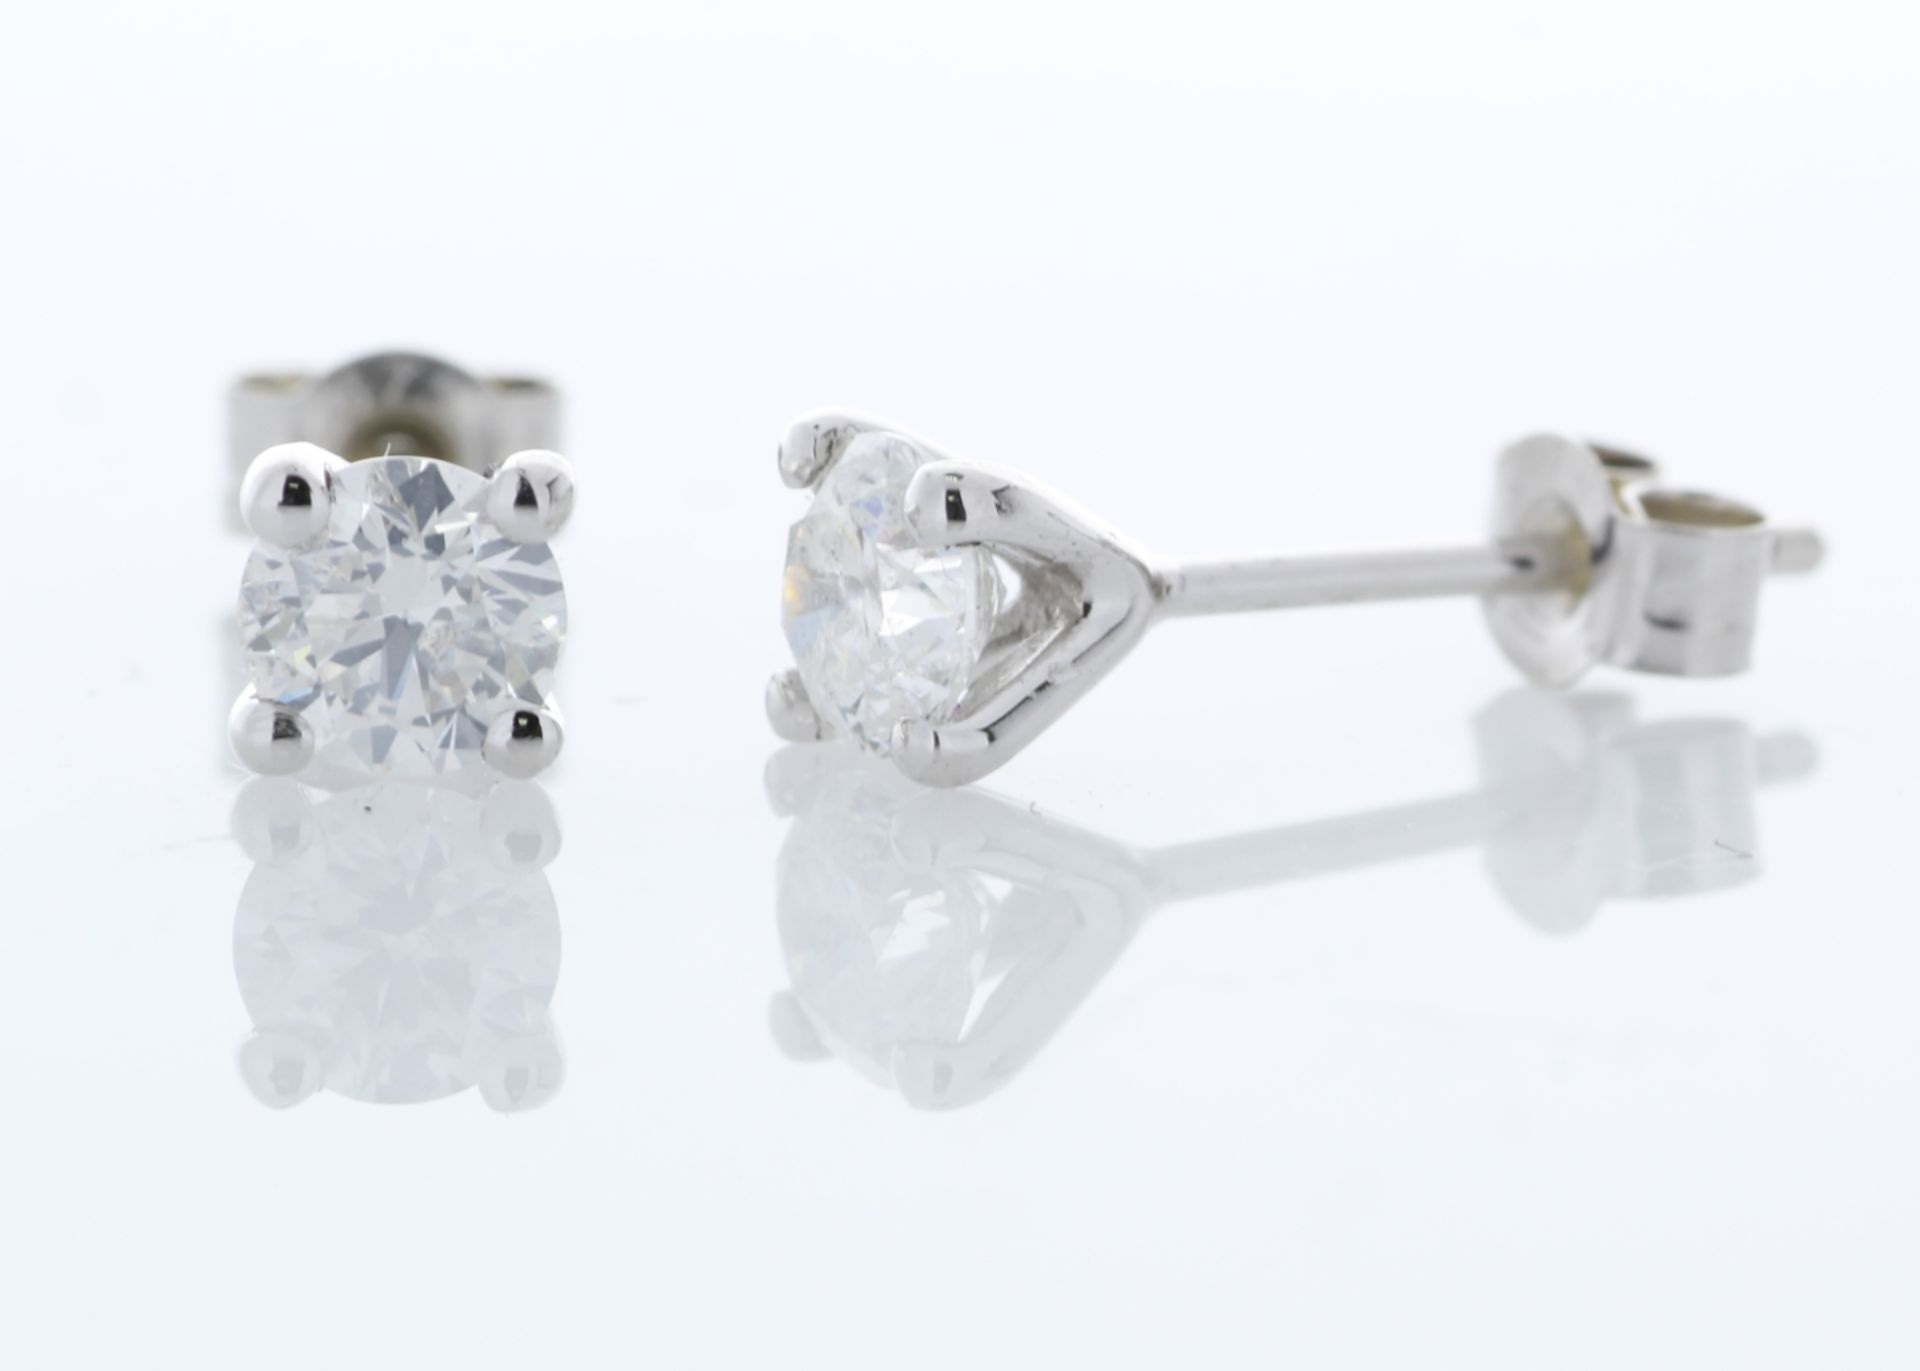 9ct White Gold Claw Set Diamond Earrins 0.50 Carats - Image 2 of 3